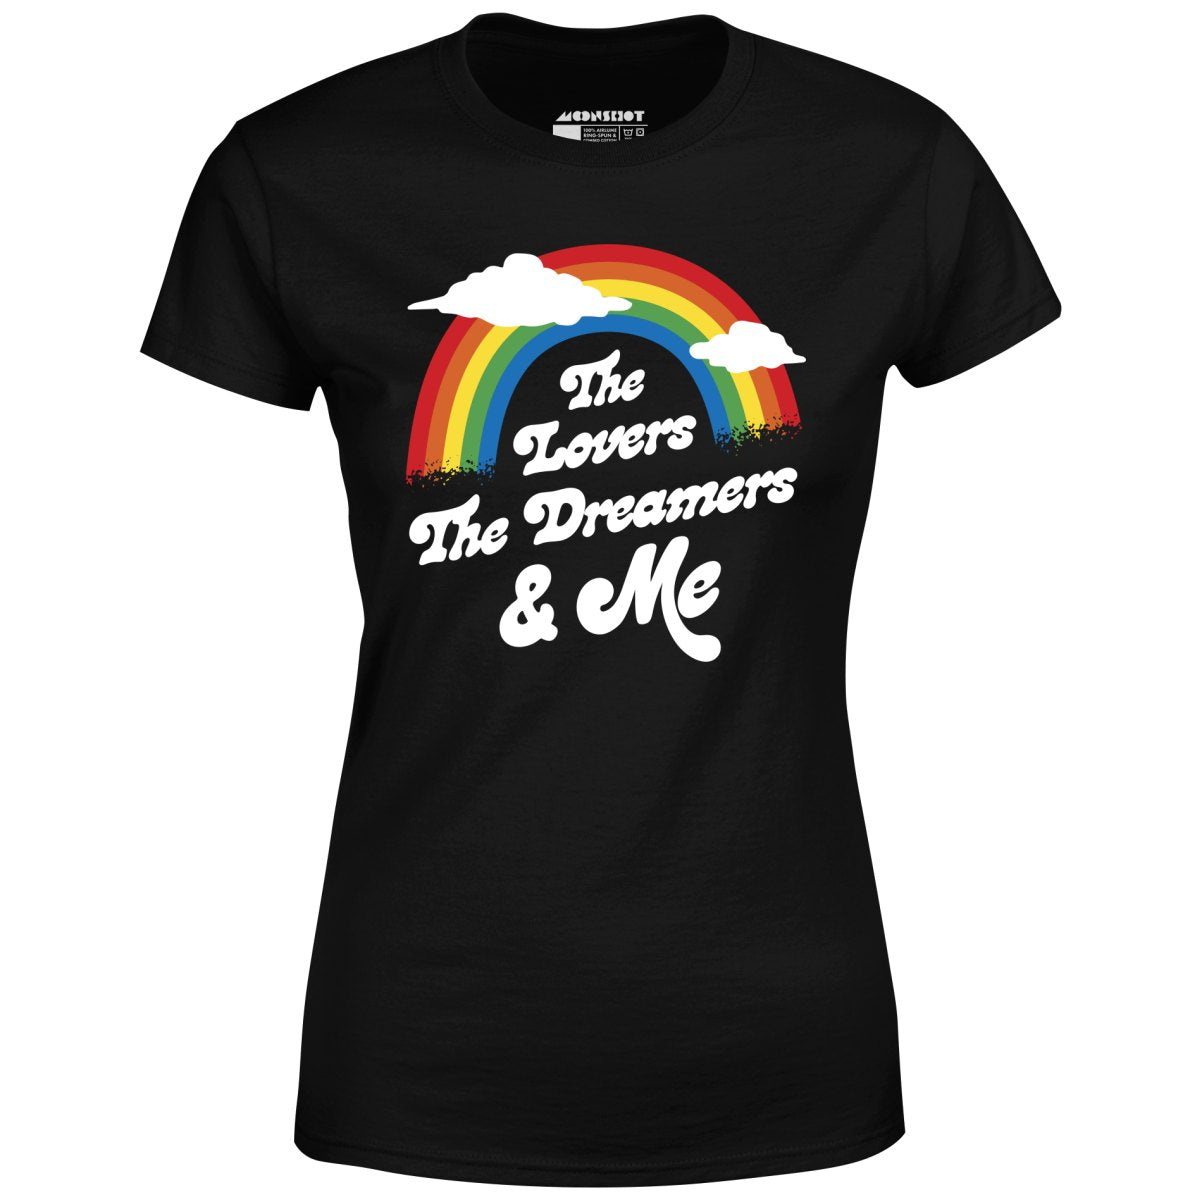 The Lovers The Dreamers & Me - Women's T-Shirt